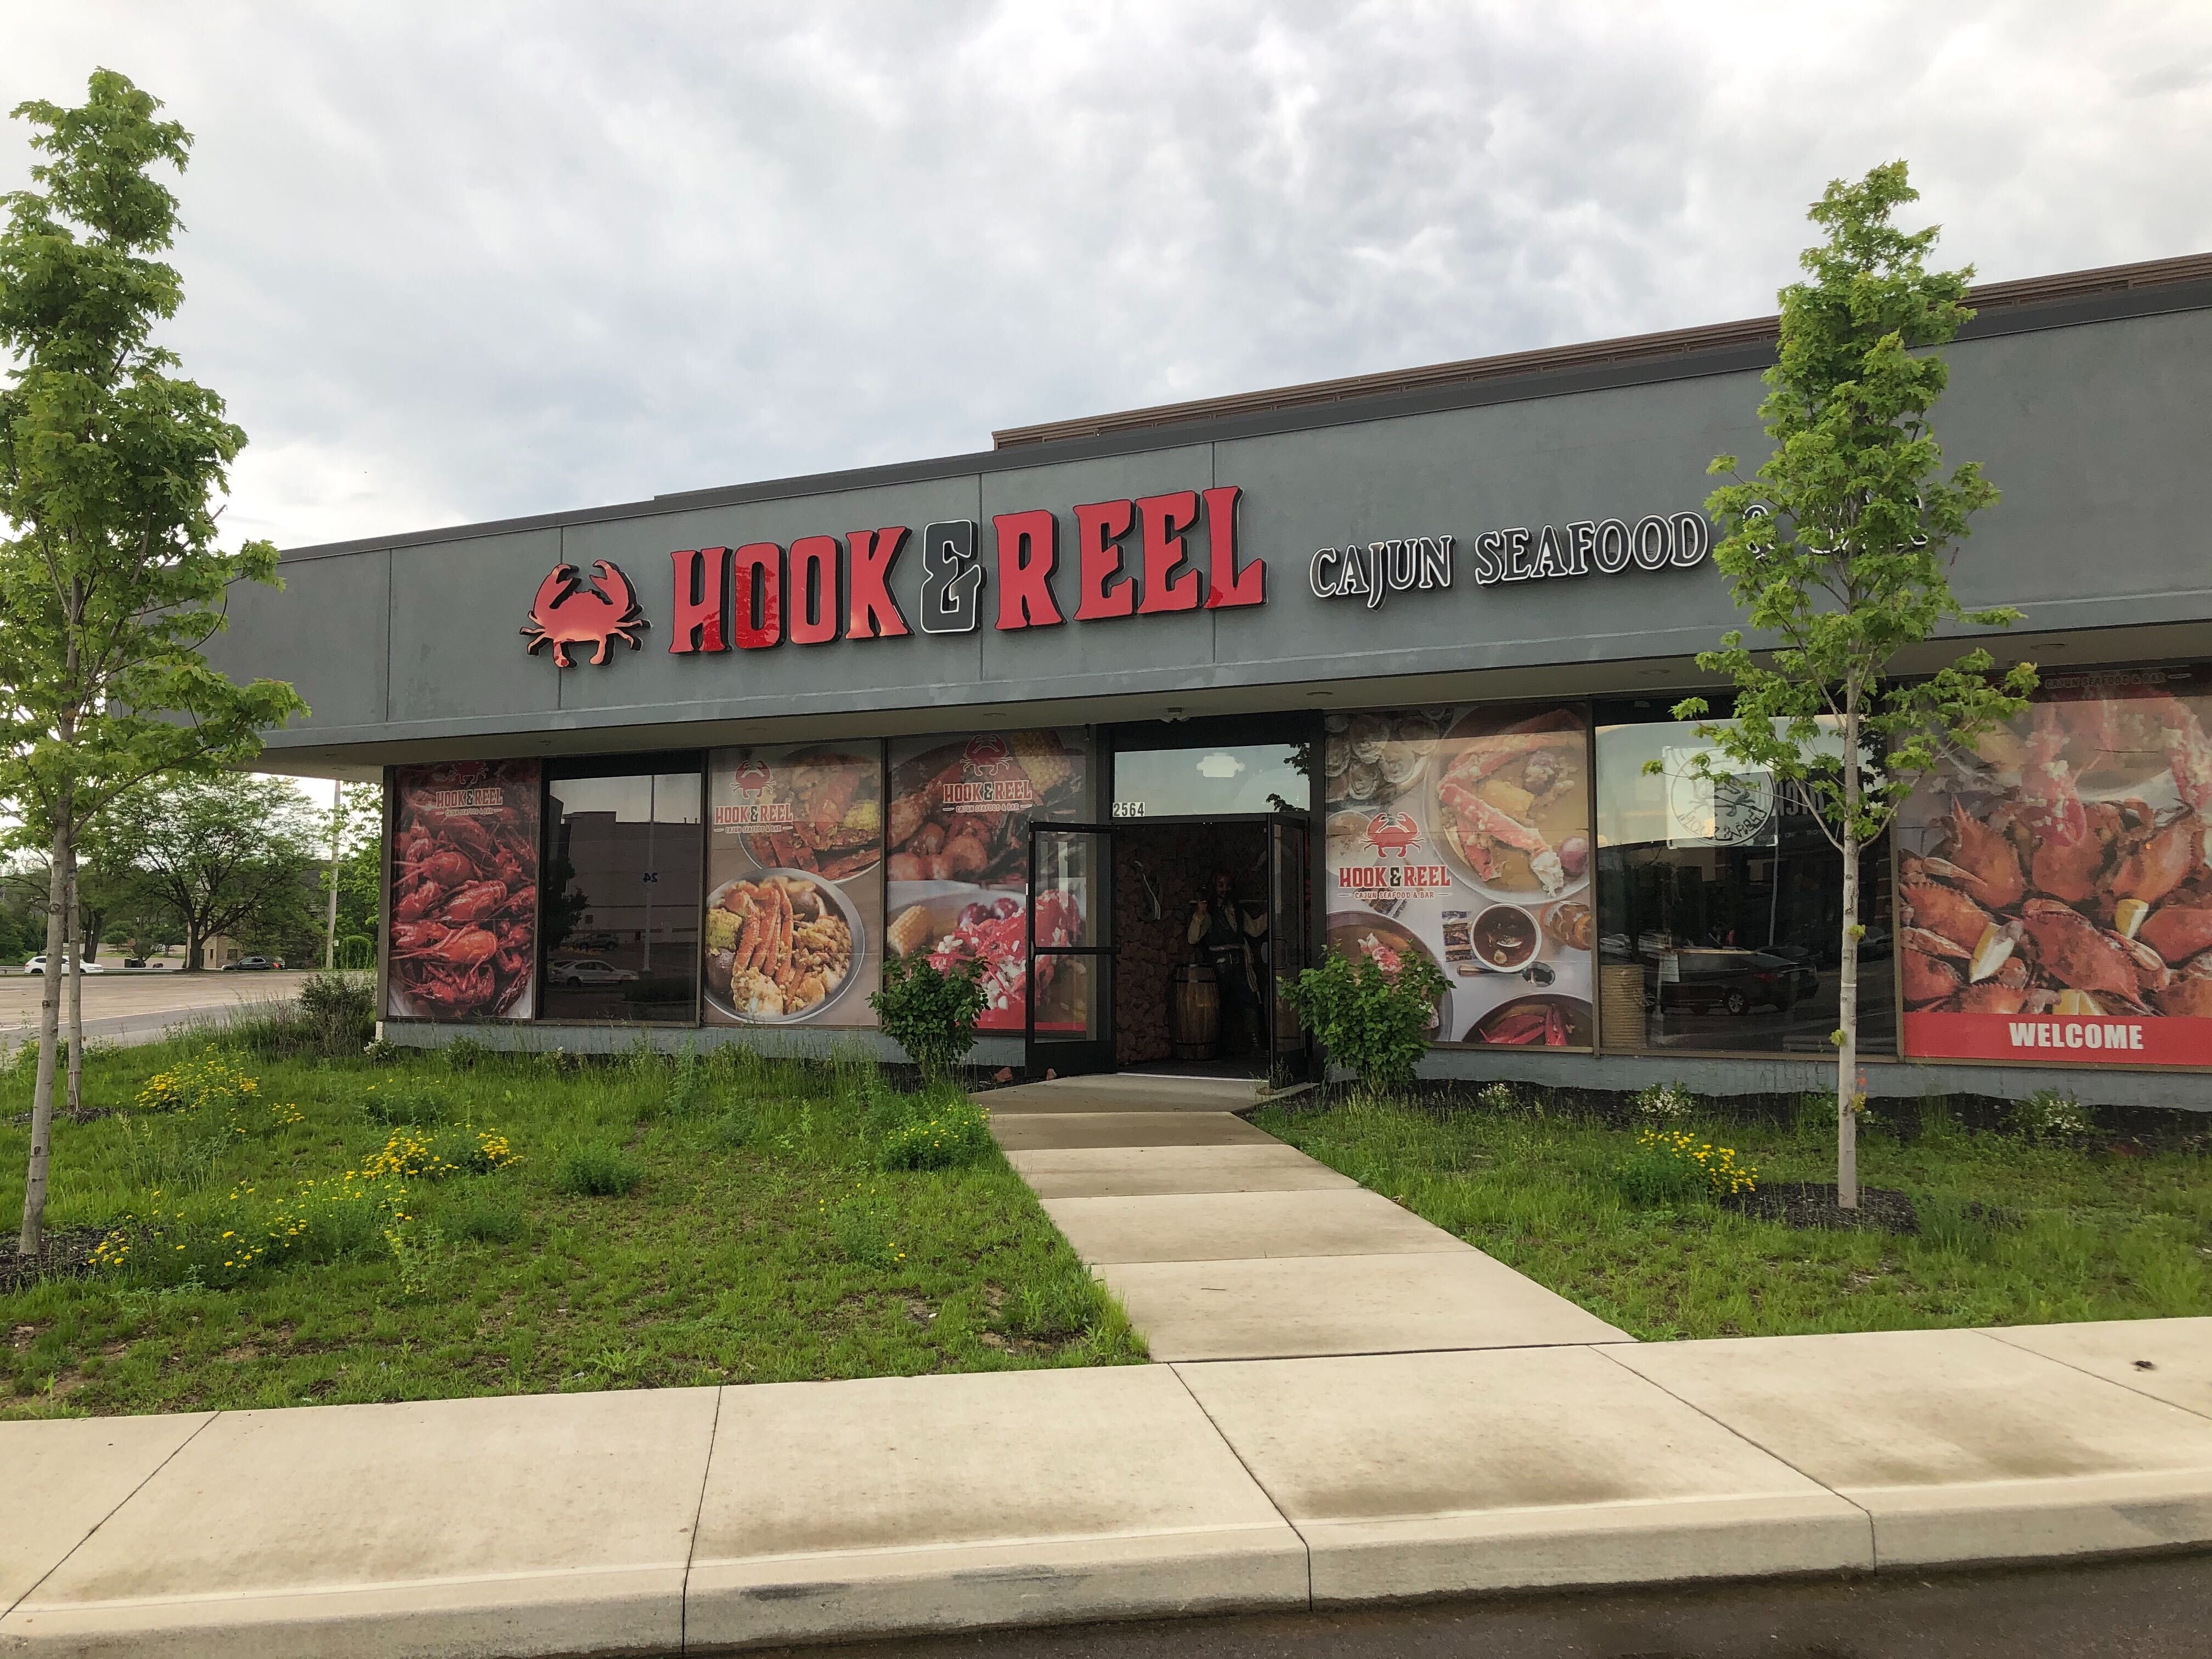 Hook & Reel seafood restaurant to open at the Dayton Mall next month